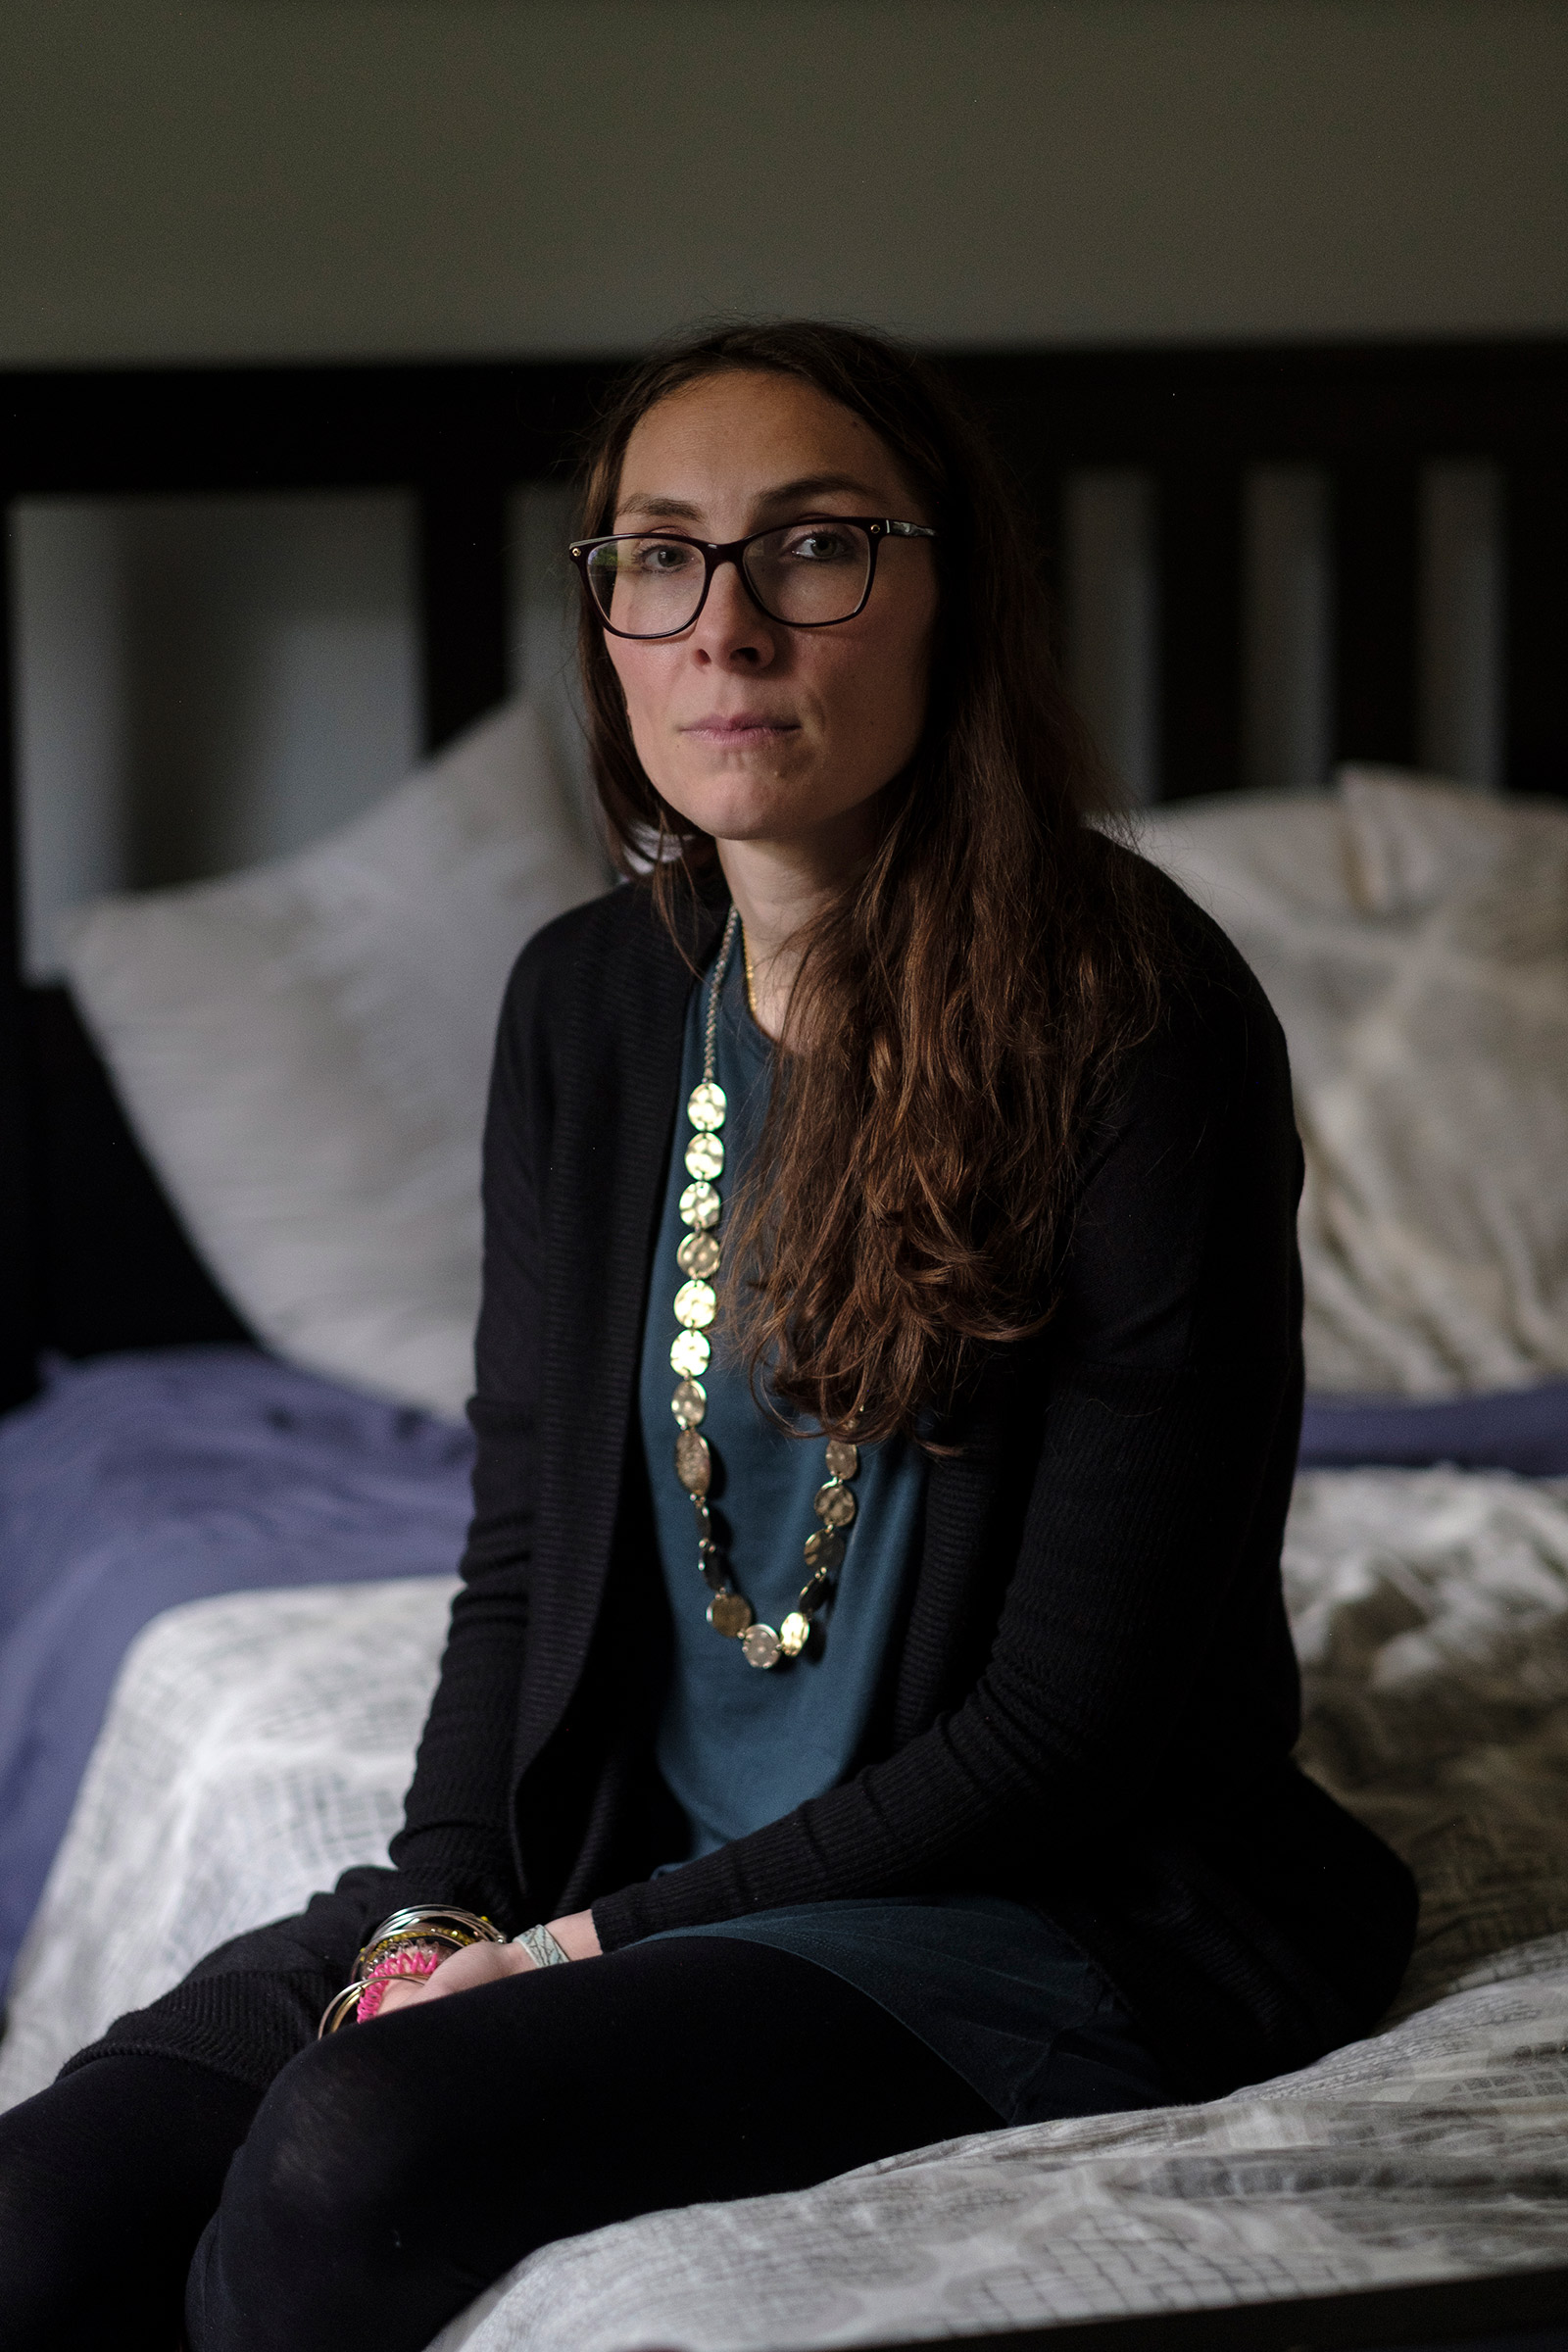 Pamela Addison, 37, a teacher in Waldwick, N.J., is the founder of a Facebook support group for COVID-19 widows and widowers. Pamela lost her husband, Martin, to COVID-19 last spring. (Sean Sirota for TIME)